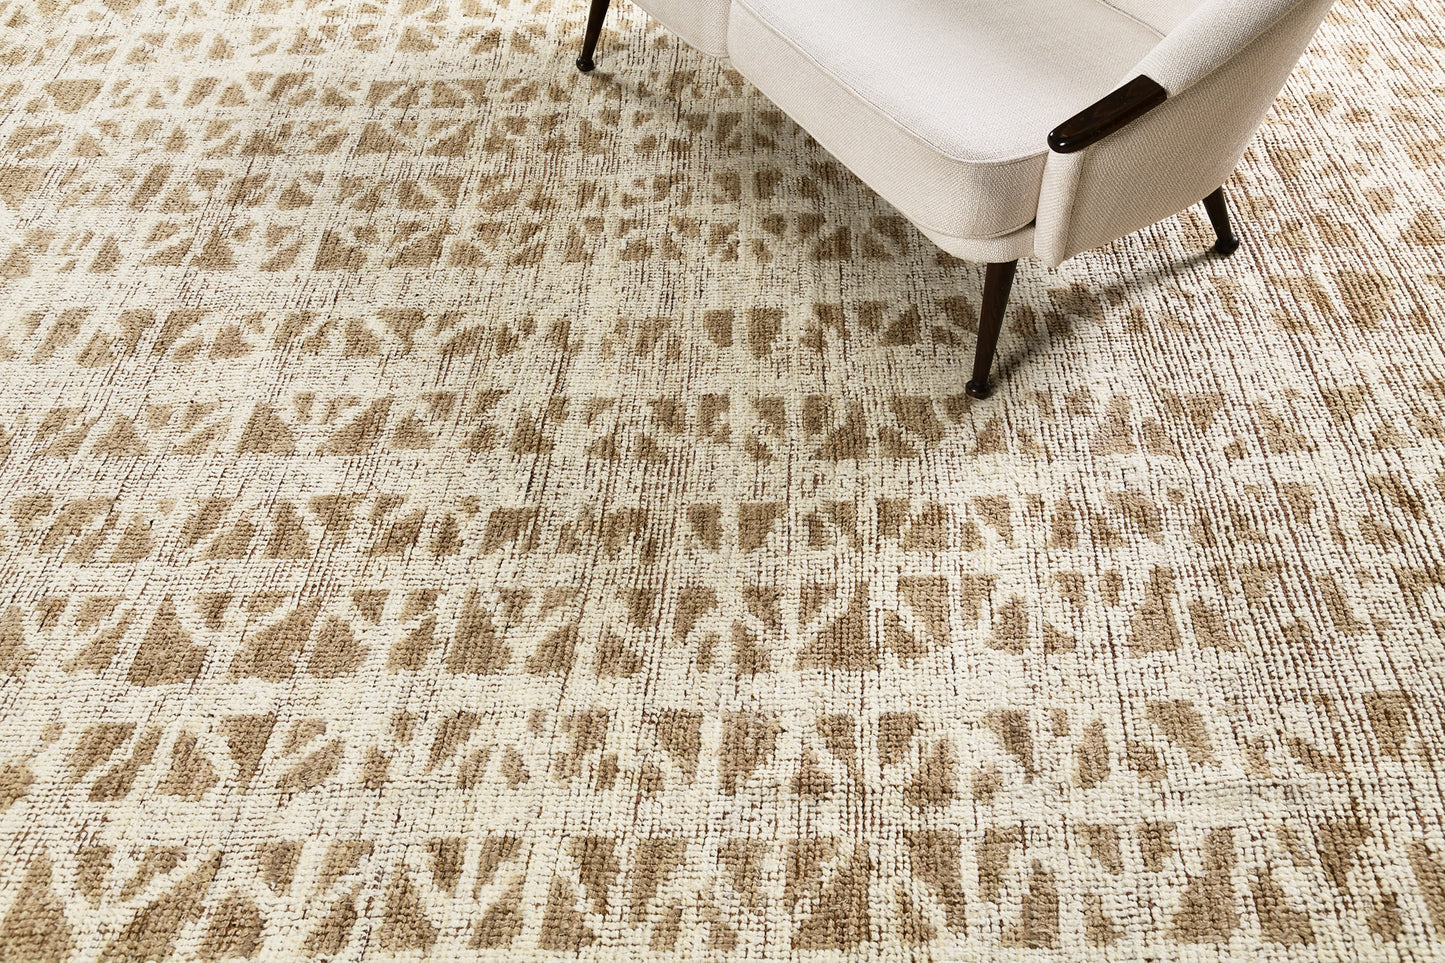 Modern Rug Image 5176 Hoopo, Nomad Collection